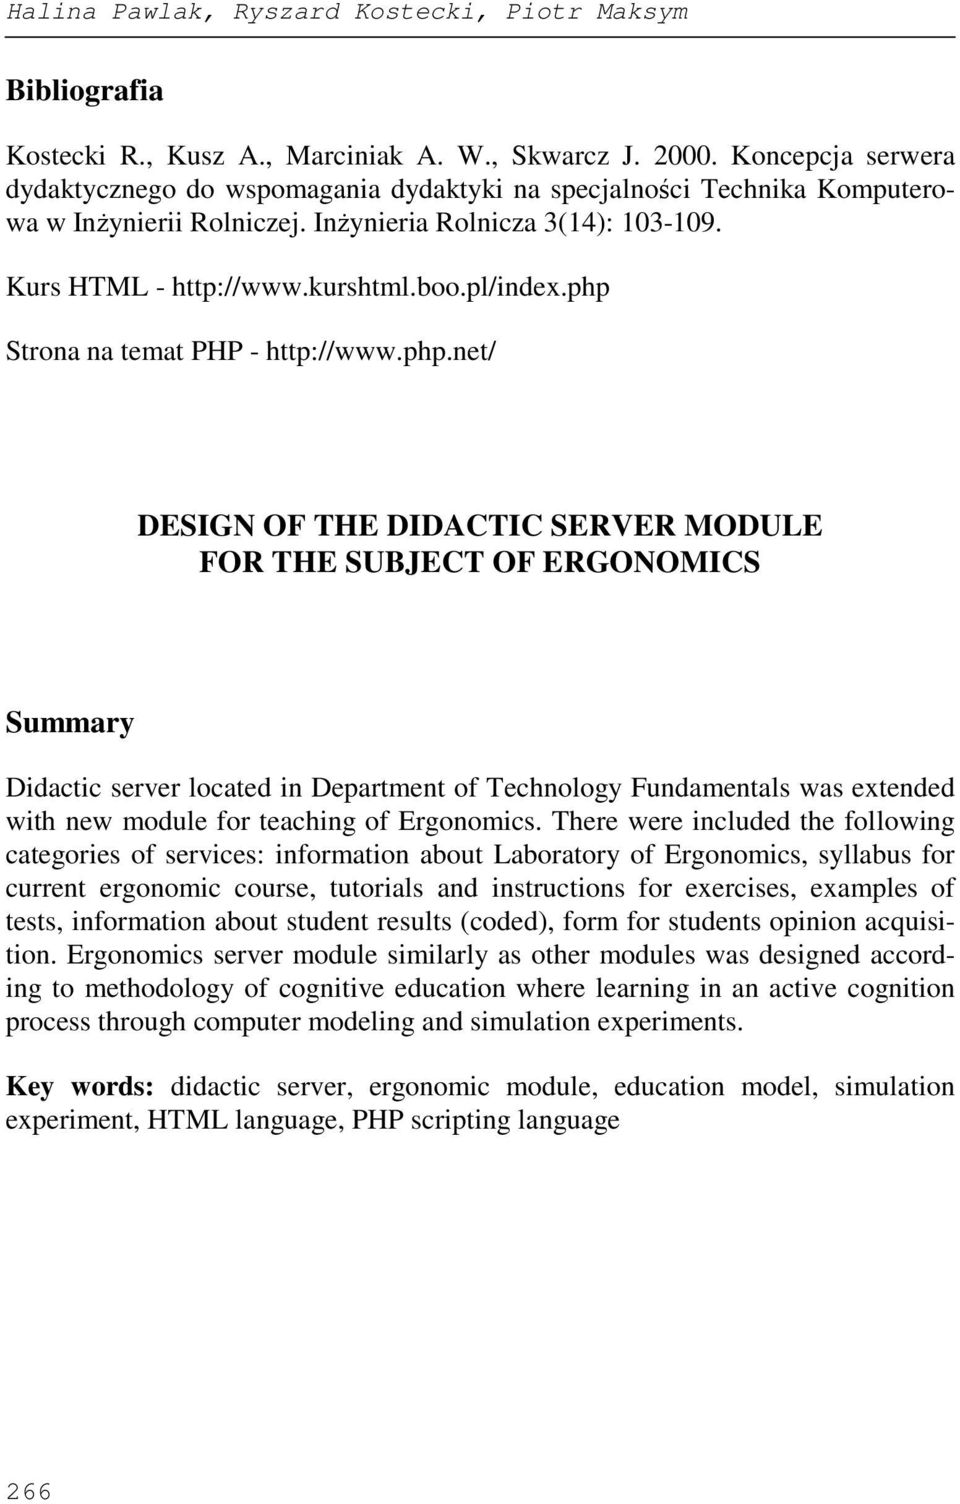 php Strona na temat PHP - http://www.php.net/ DESIGN OF THE DIDACTIC SERVER MODULE FOR THE SUBJECT OF ERGONOMICS Summary Didactic server located in Department of Technology Fundamentals was extended